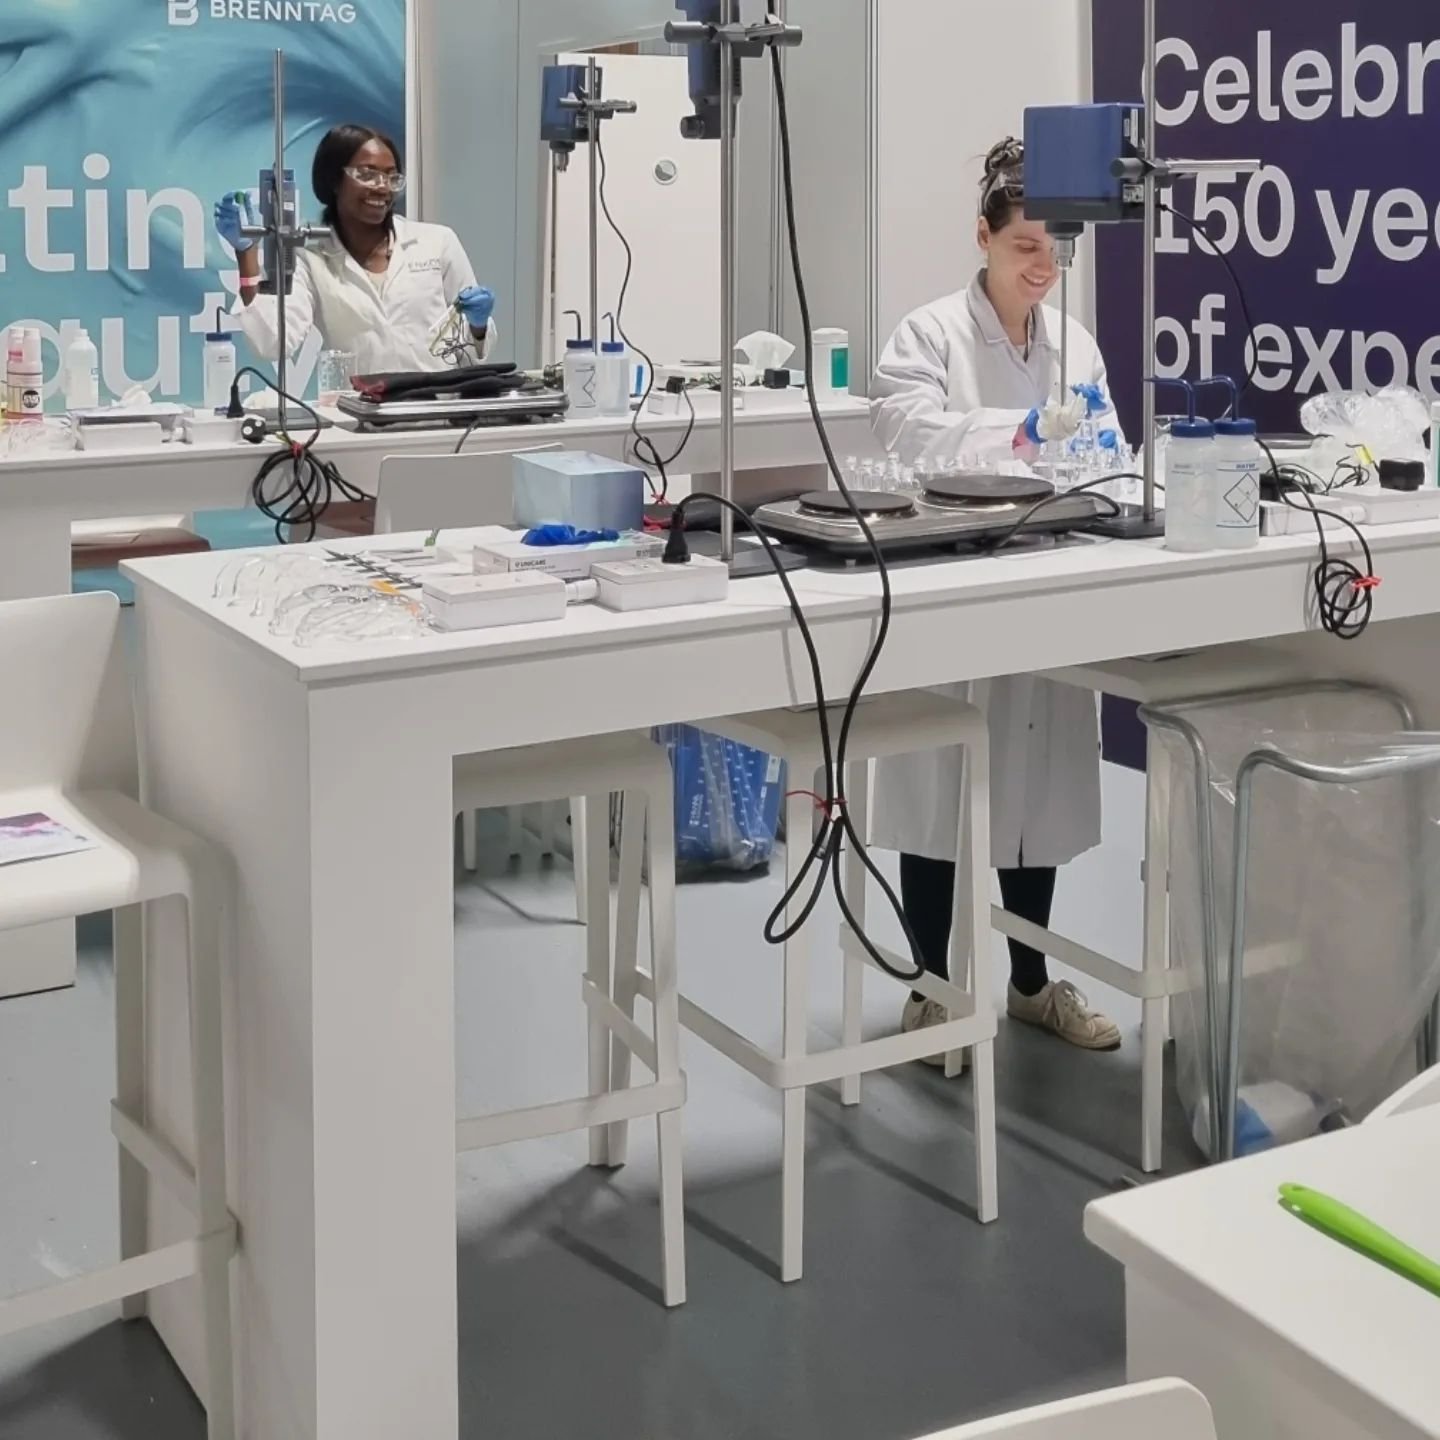 Thank you for visiting our stand and participating in the Formulation Lab sessions at @in_cosmetics Global in Paris!

It was a fantastic event filled with engaging discussions, insightful presentations, and memorable moments. 

Here's to continued in